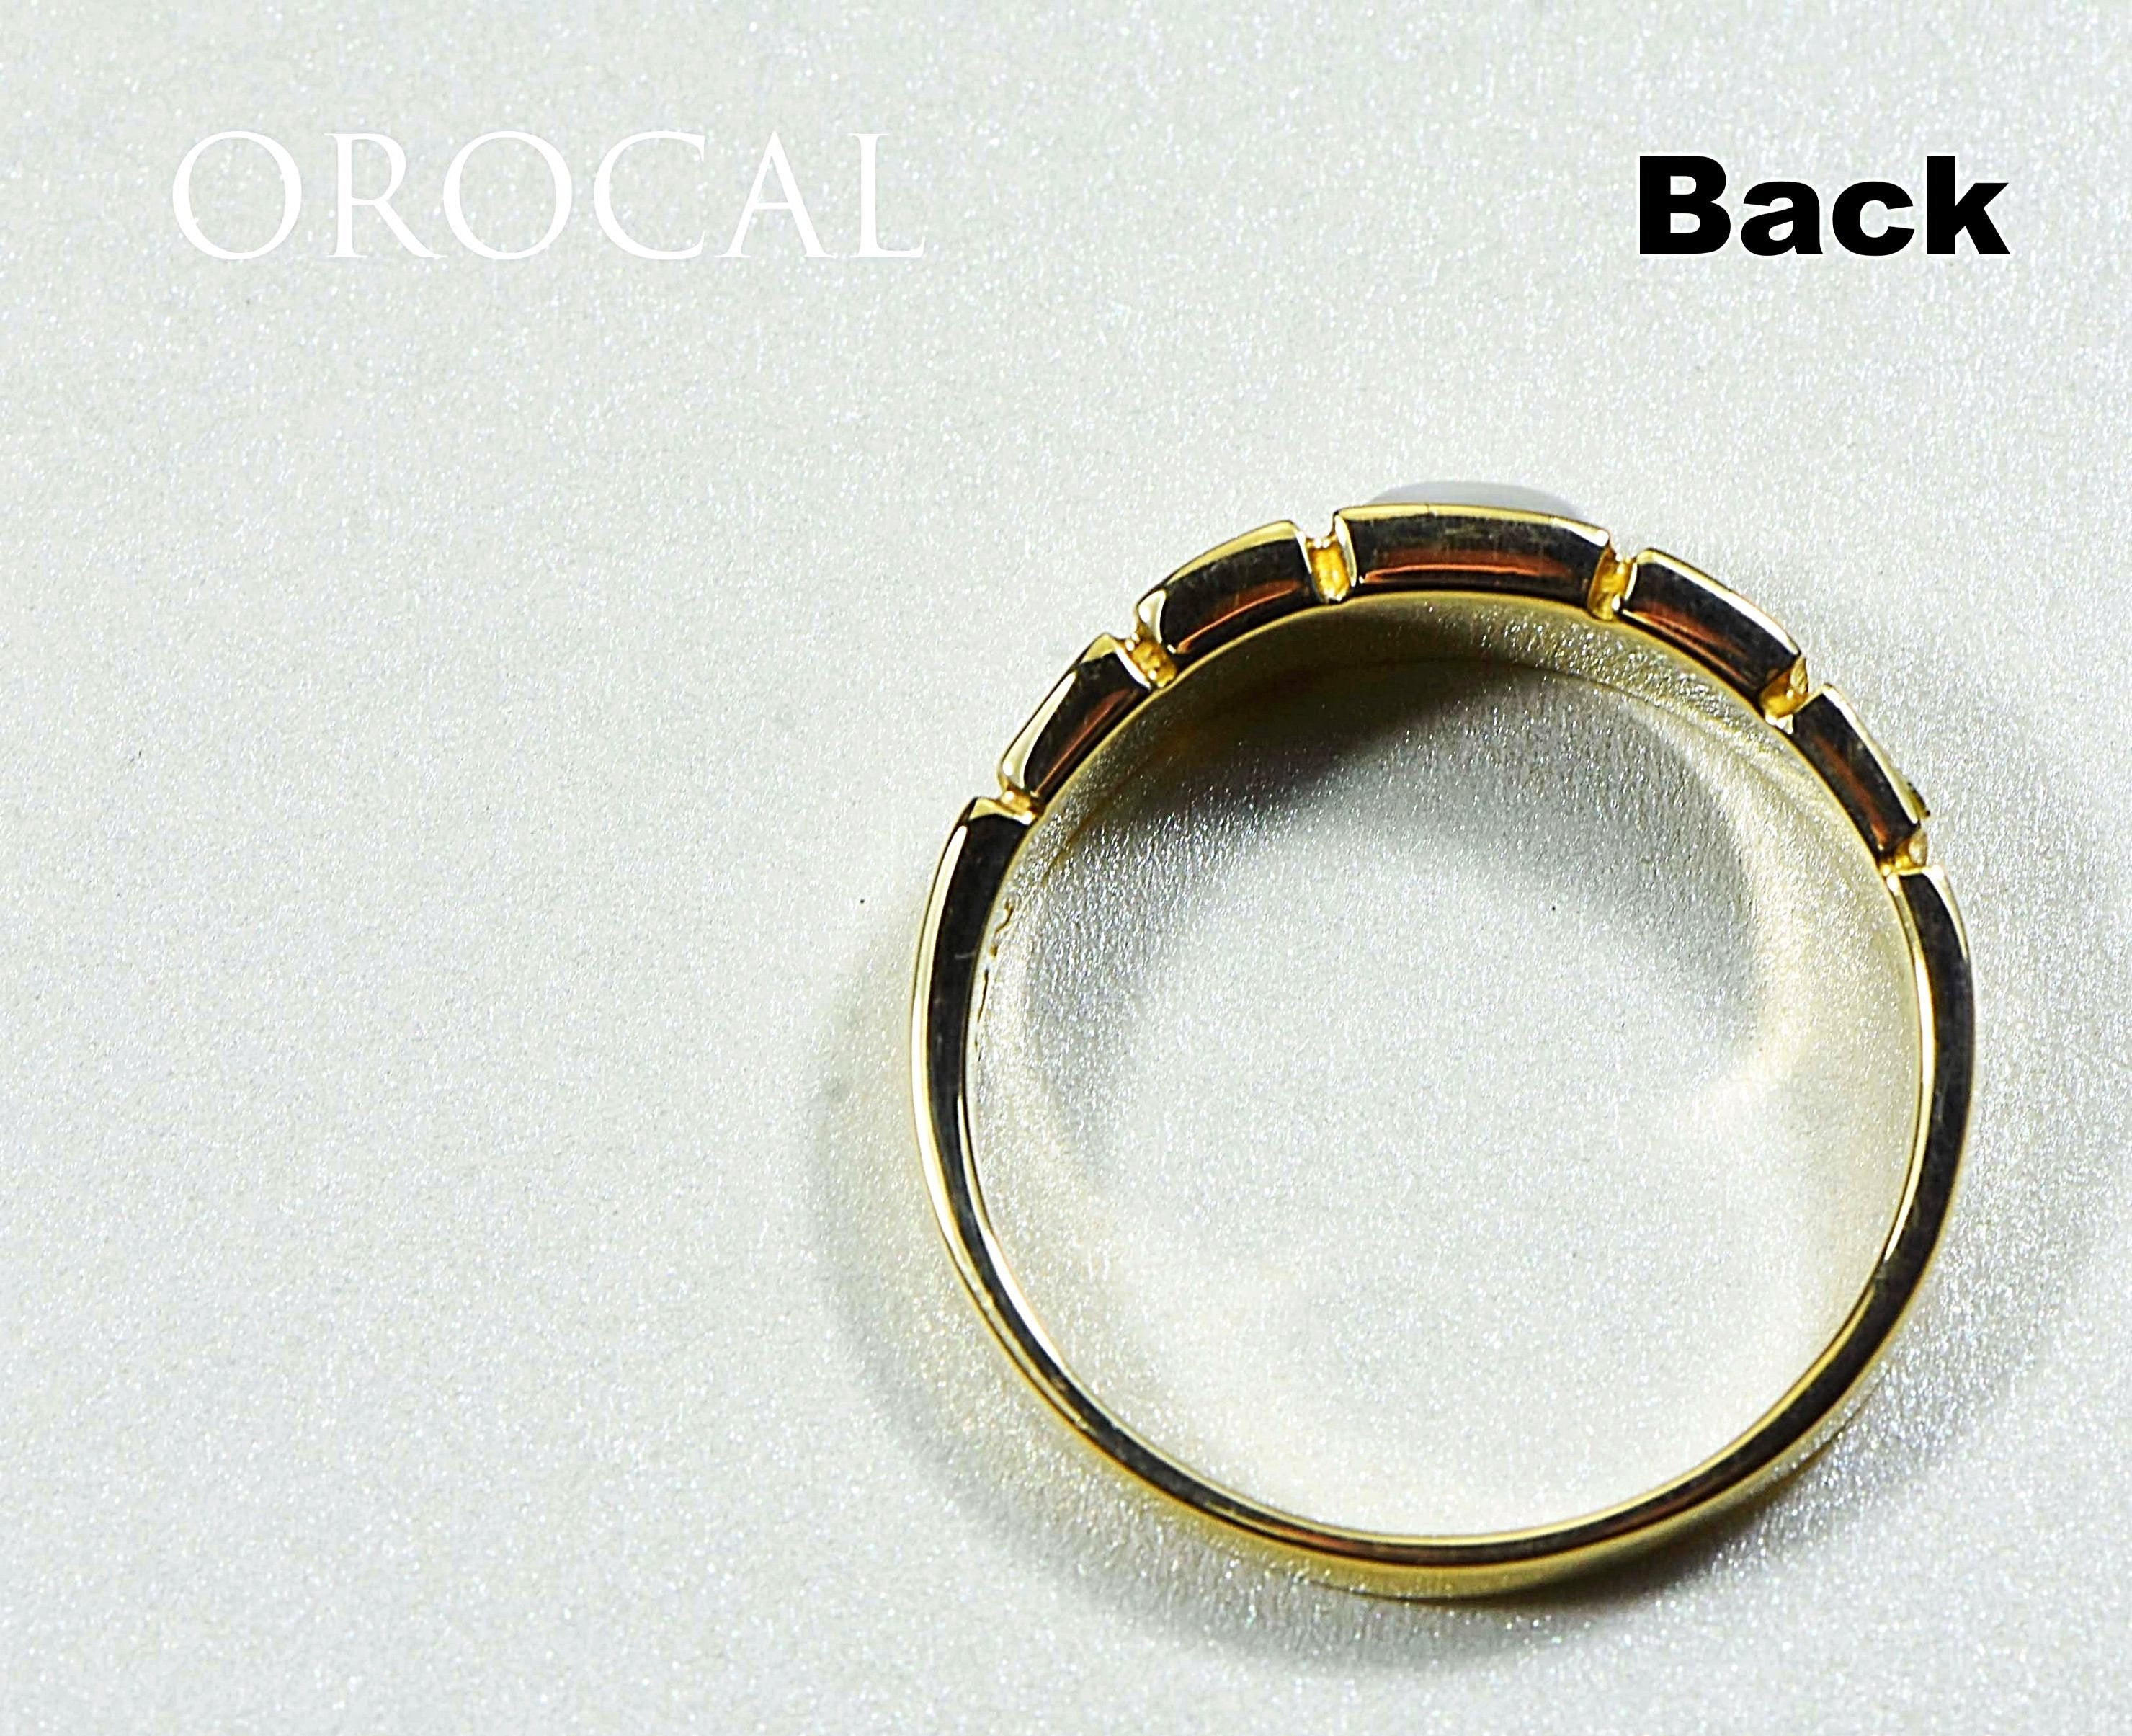 Gold Quartz Ring "Orocal" RM1045NQ Genuine Hand Crafted Jewelry - 14K Gold Casting